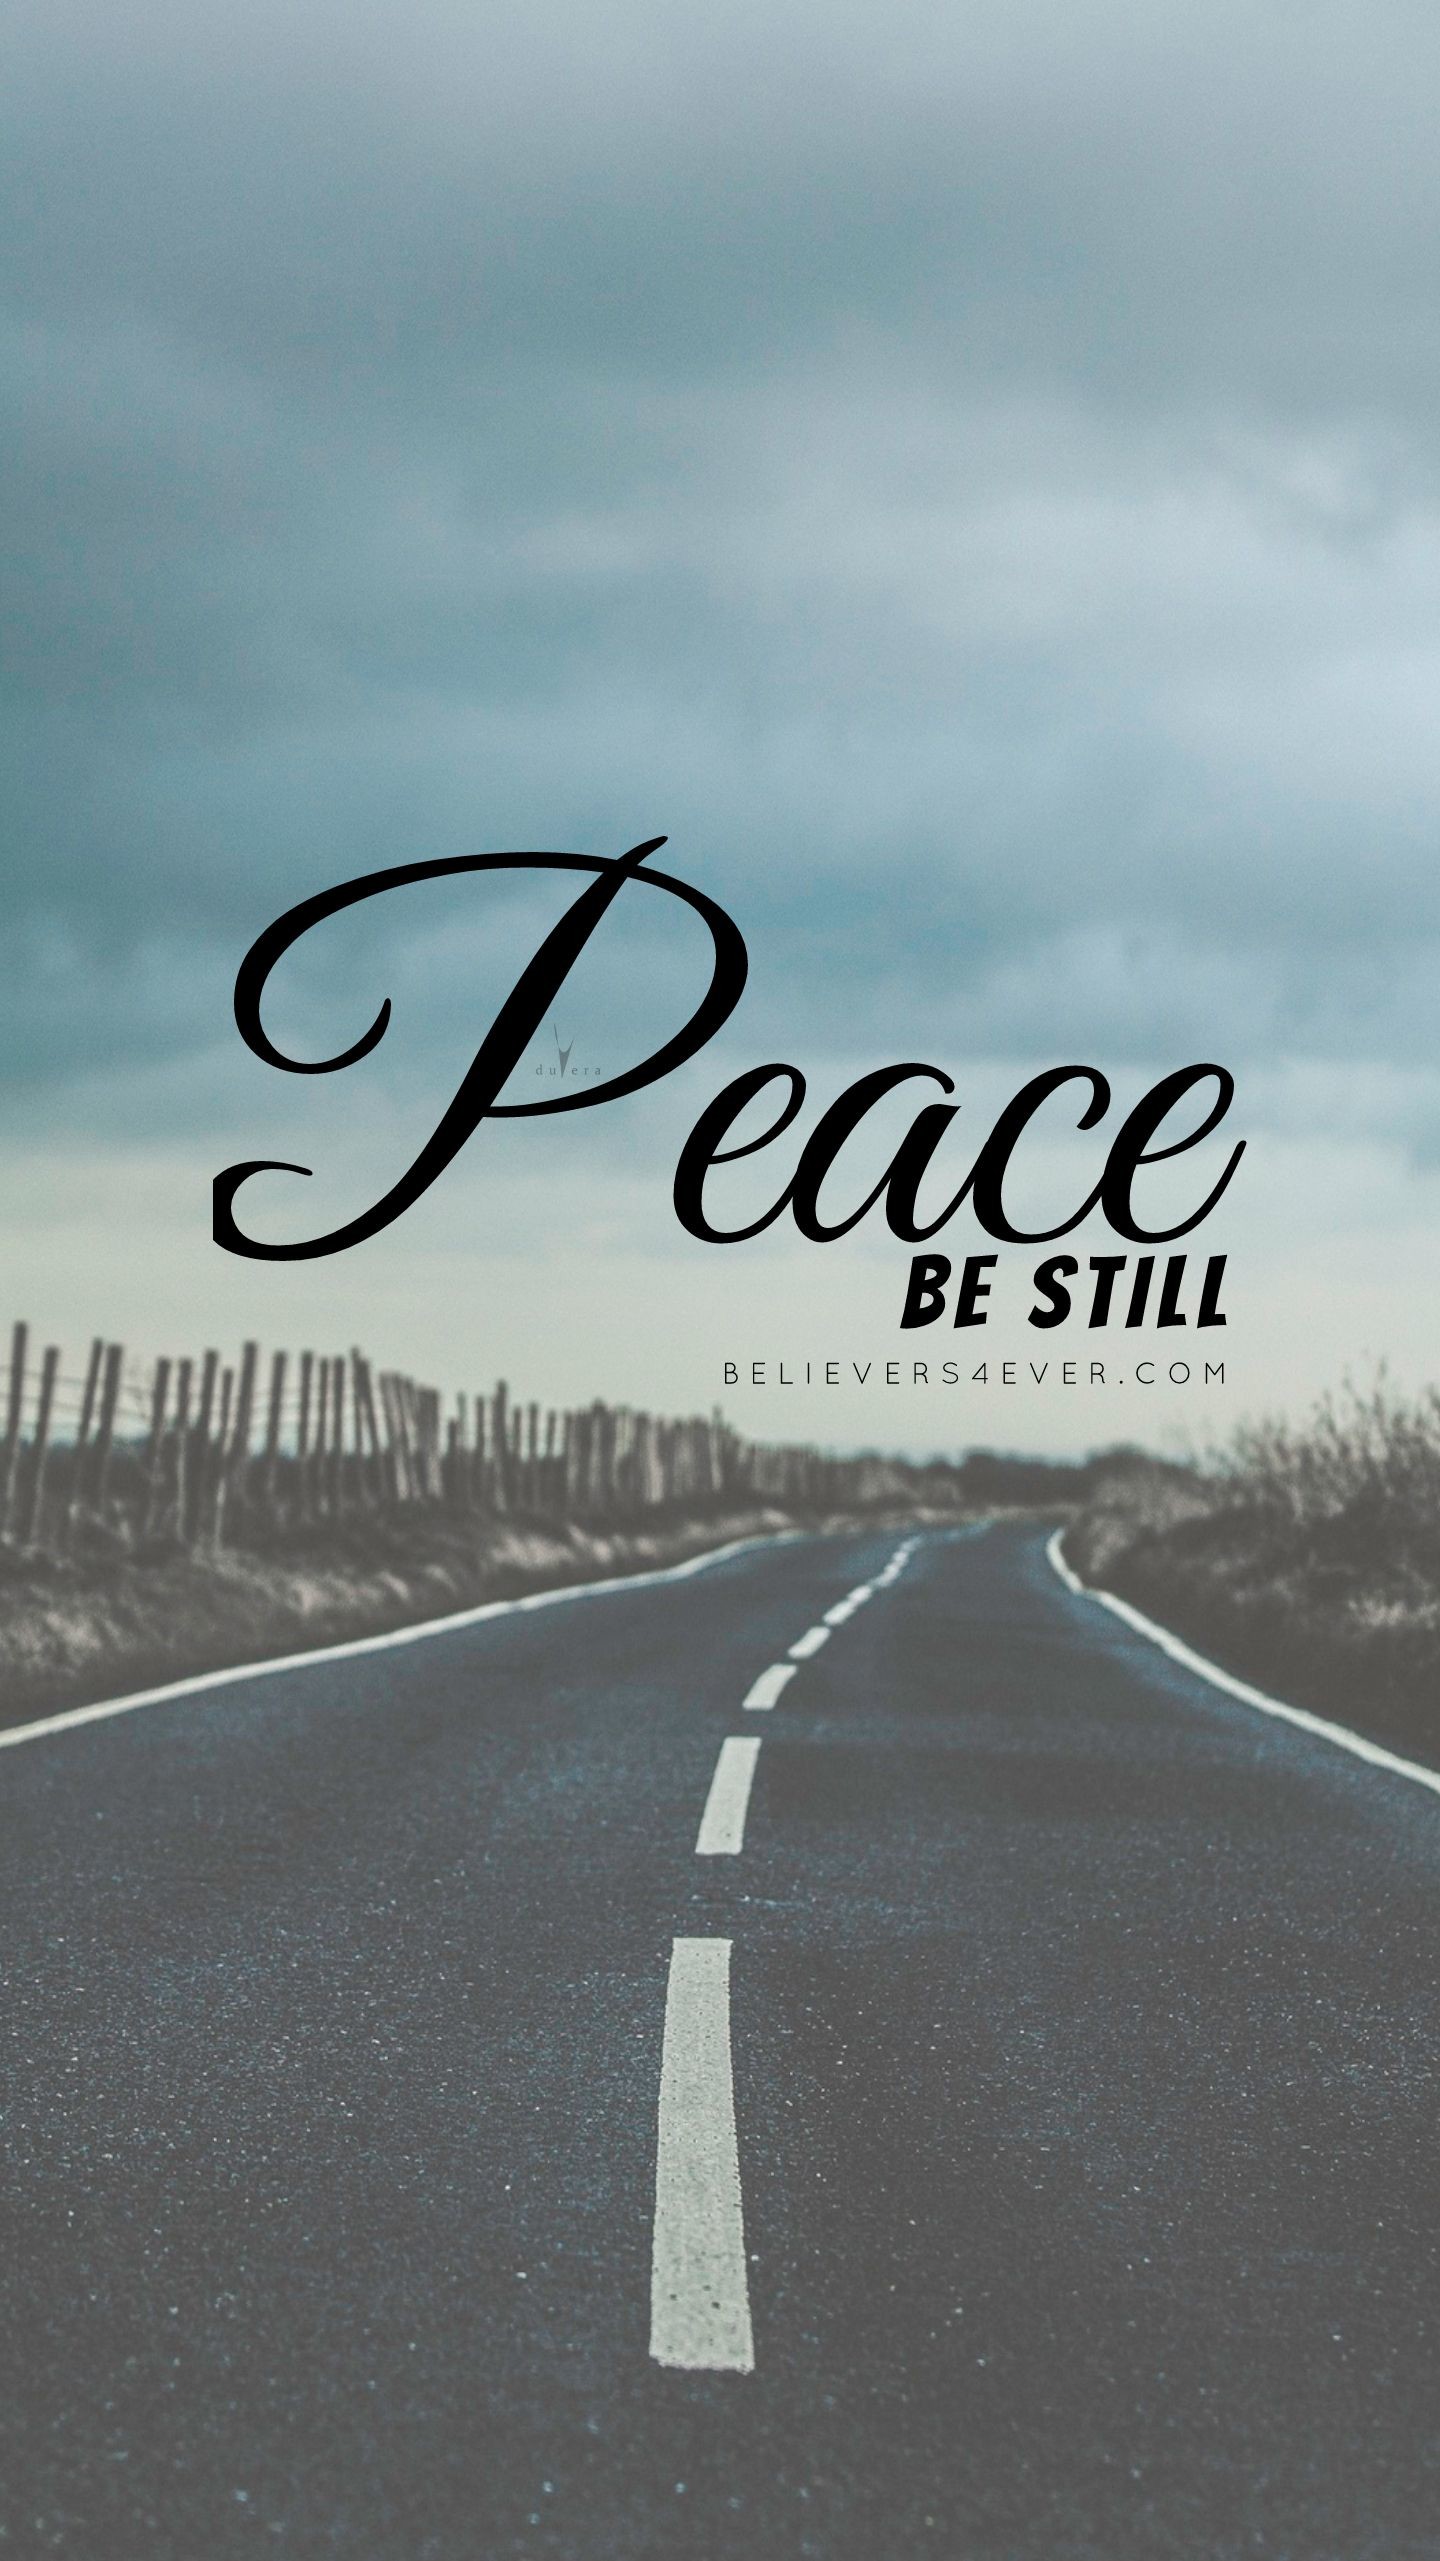 1440x2561 Peace be still Free Christian lock screen wallpaper background for your  mobile phone device. Compatible with iPhones and Android phones,